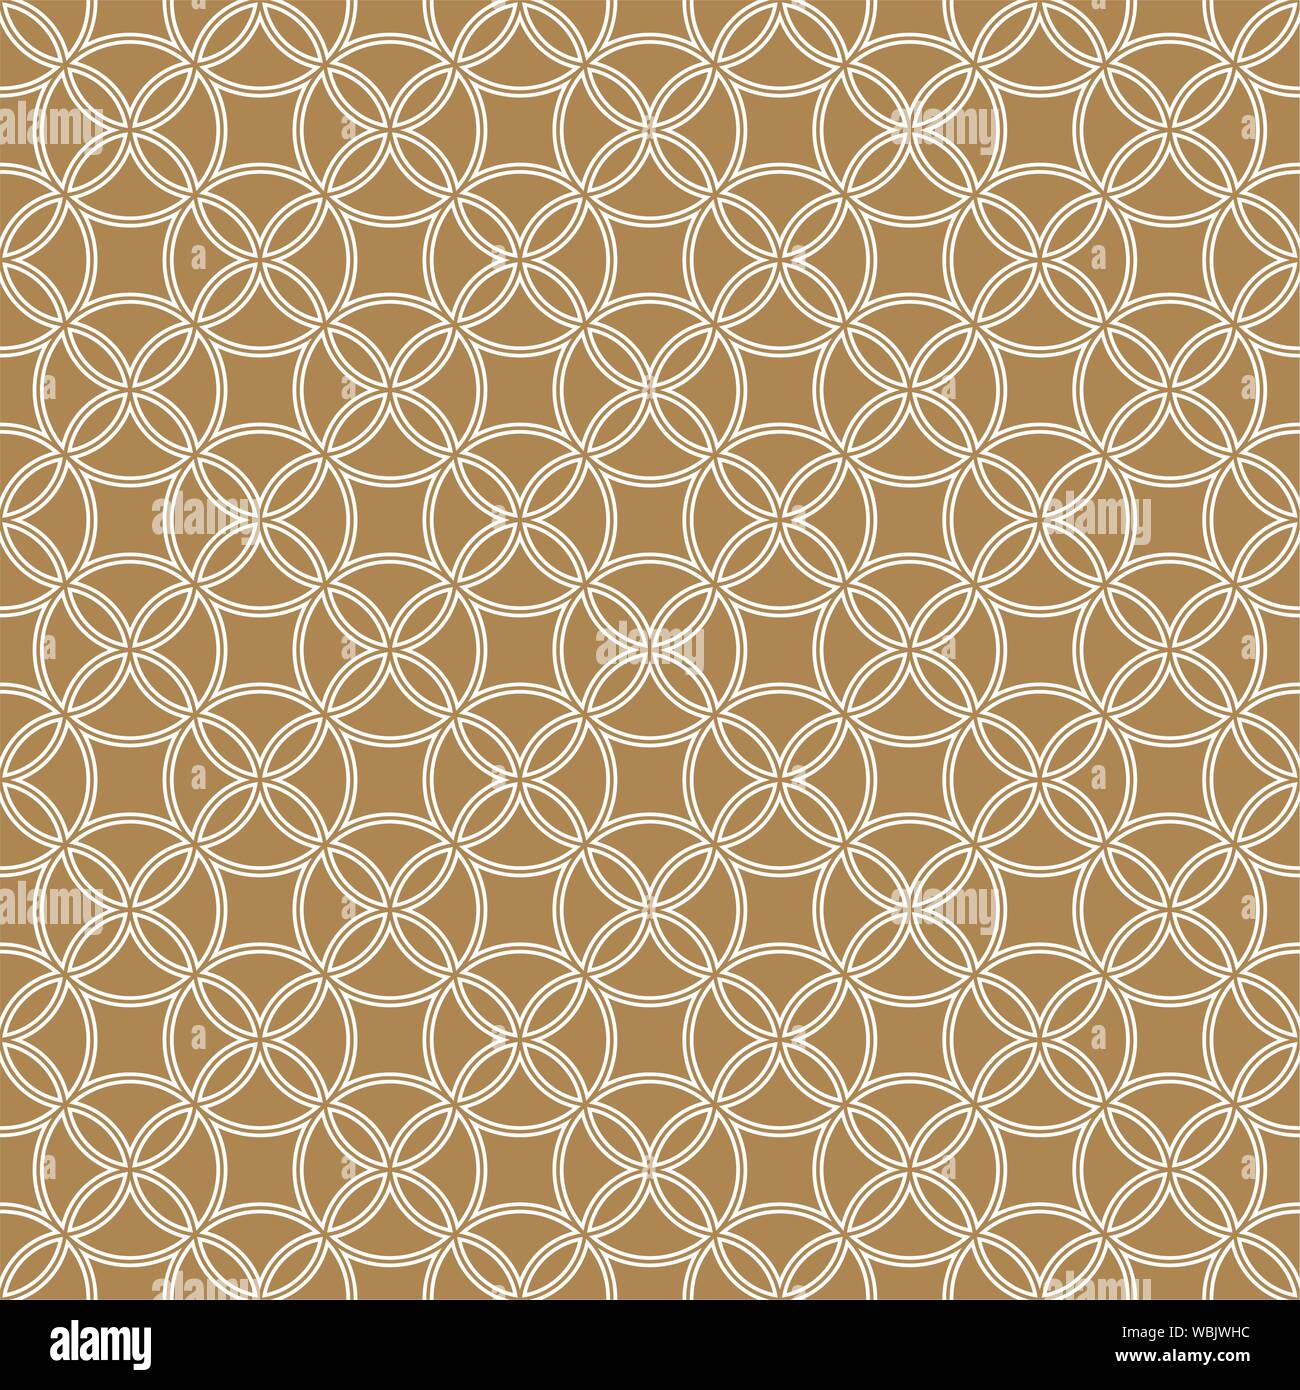 Seamless geometric pattern doubled lines on a brown background. Stock Vector